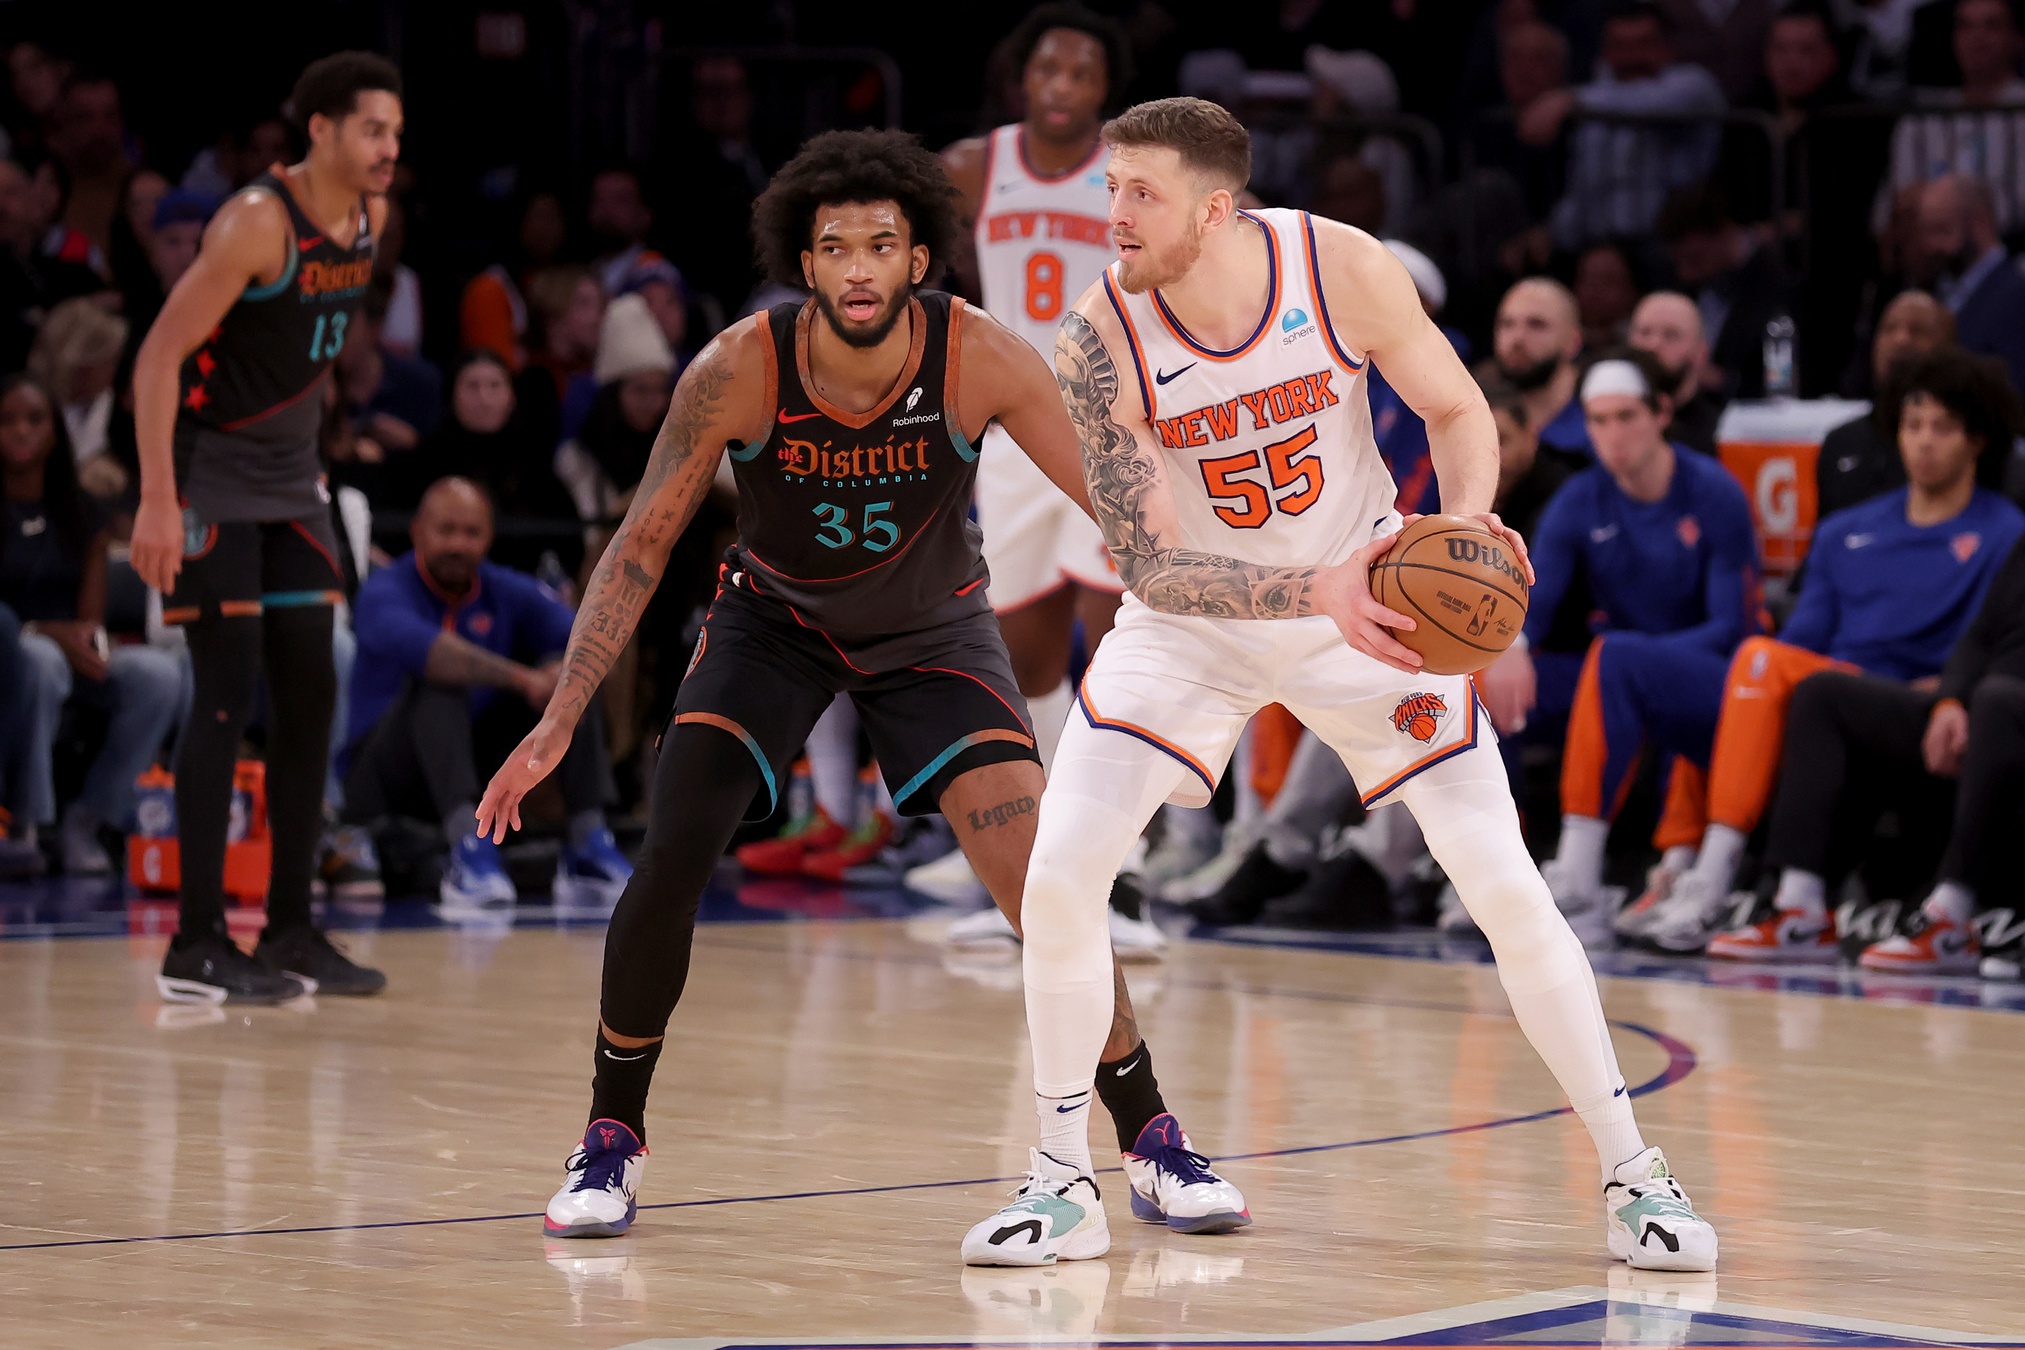 New York Knicks center Isaiah Hartenstein (55) controls the ball against Washington Wizards forward Marvin Bagley III (35) during the fourth quarter at Madison Square Garden.